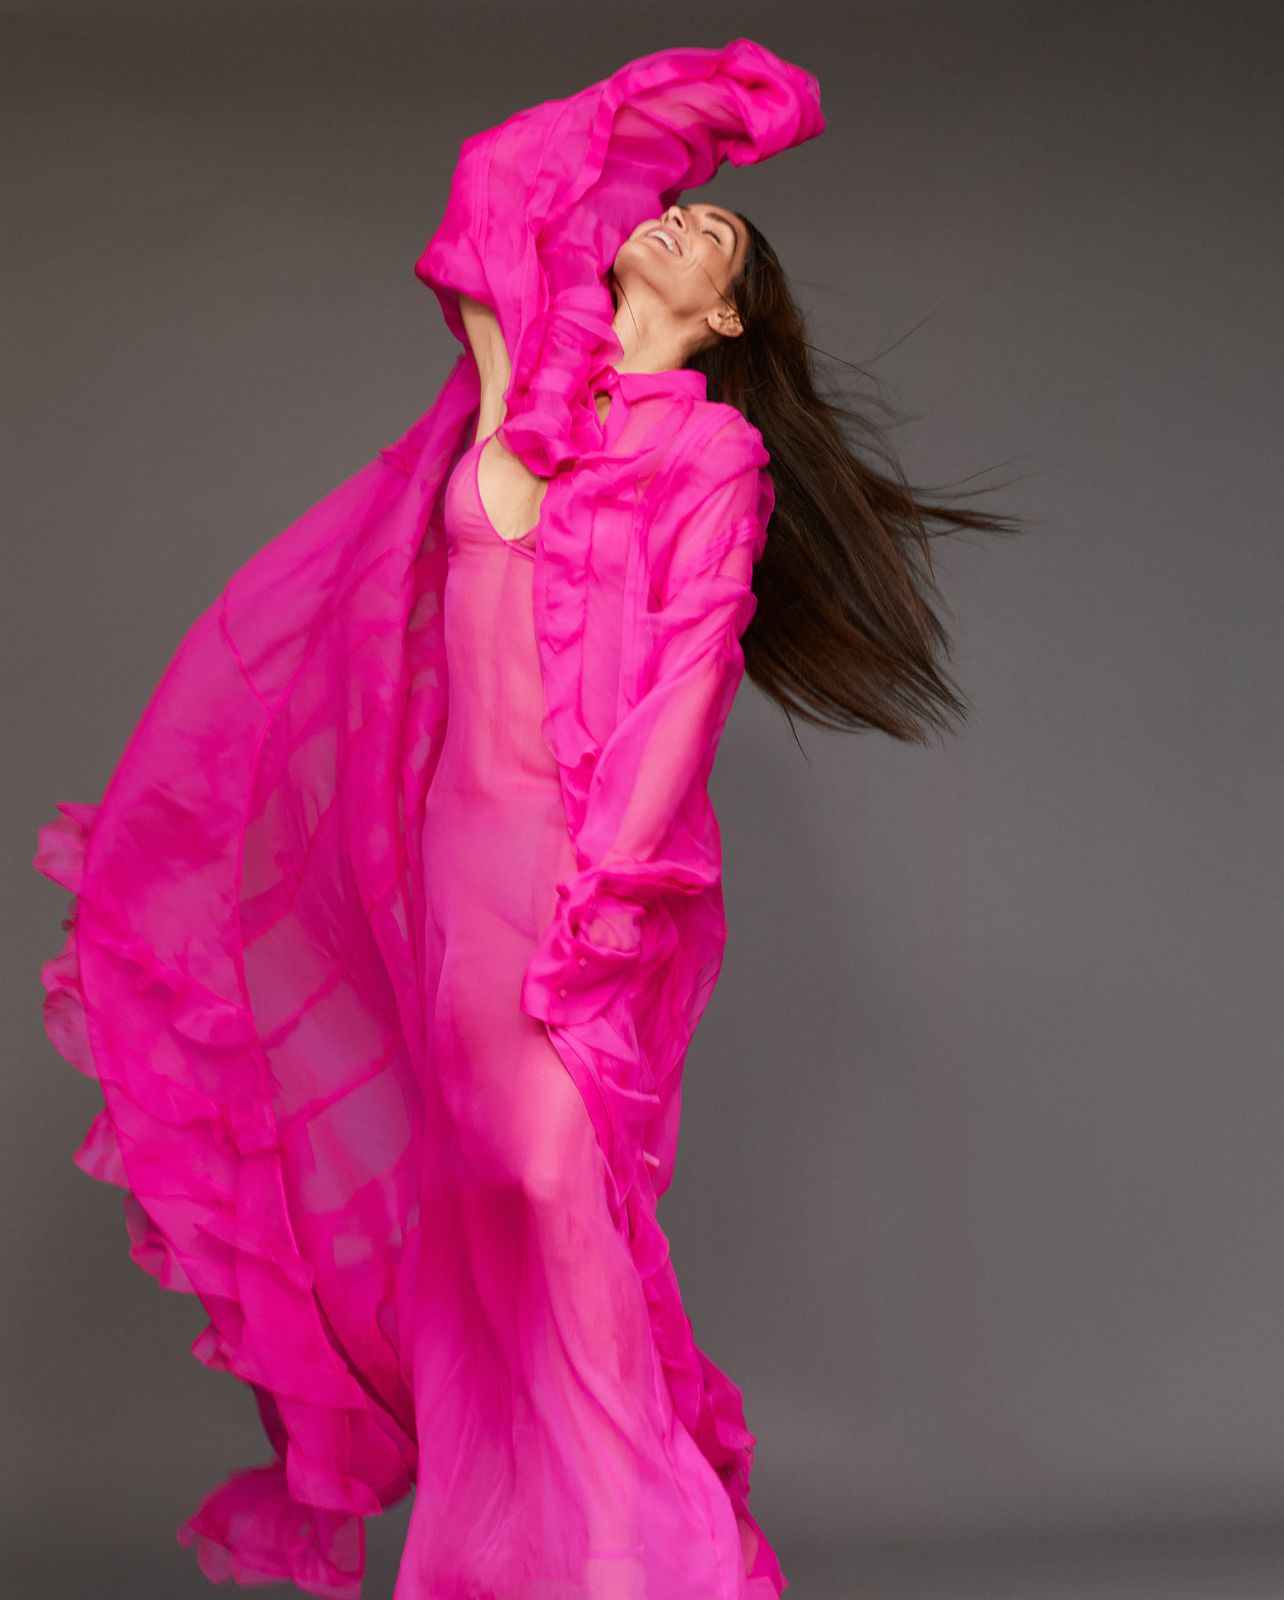 Model poses in a pink valentino dress